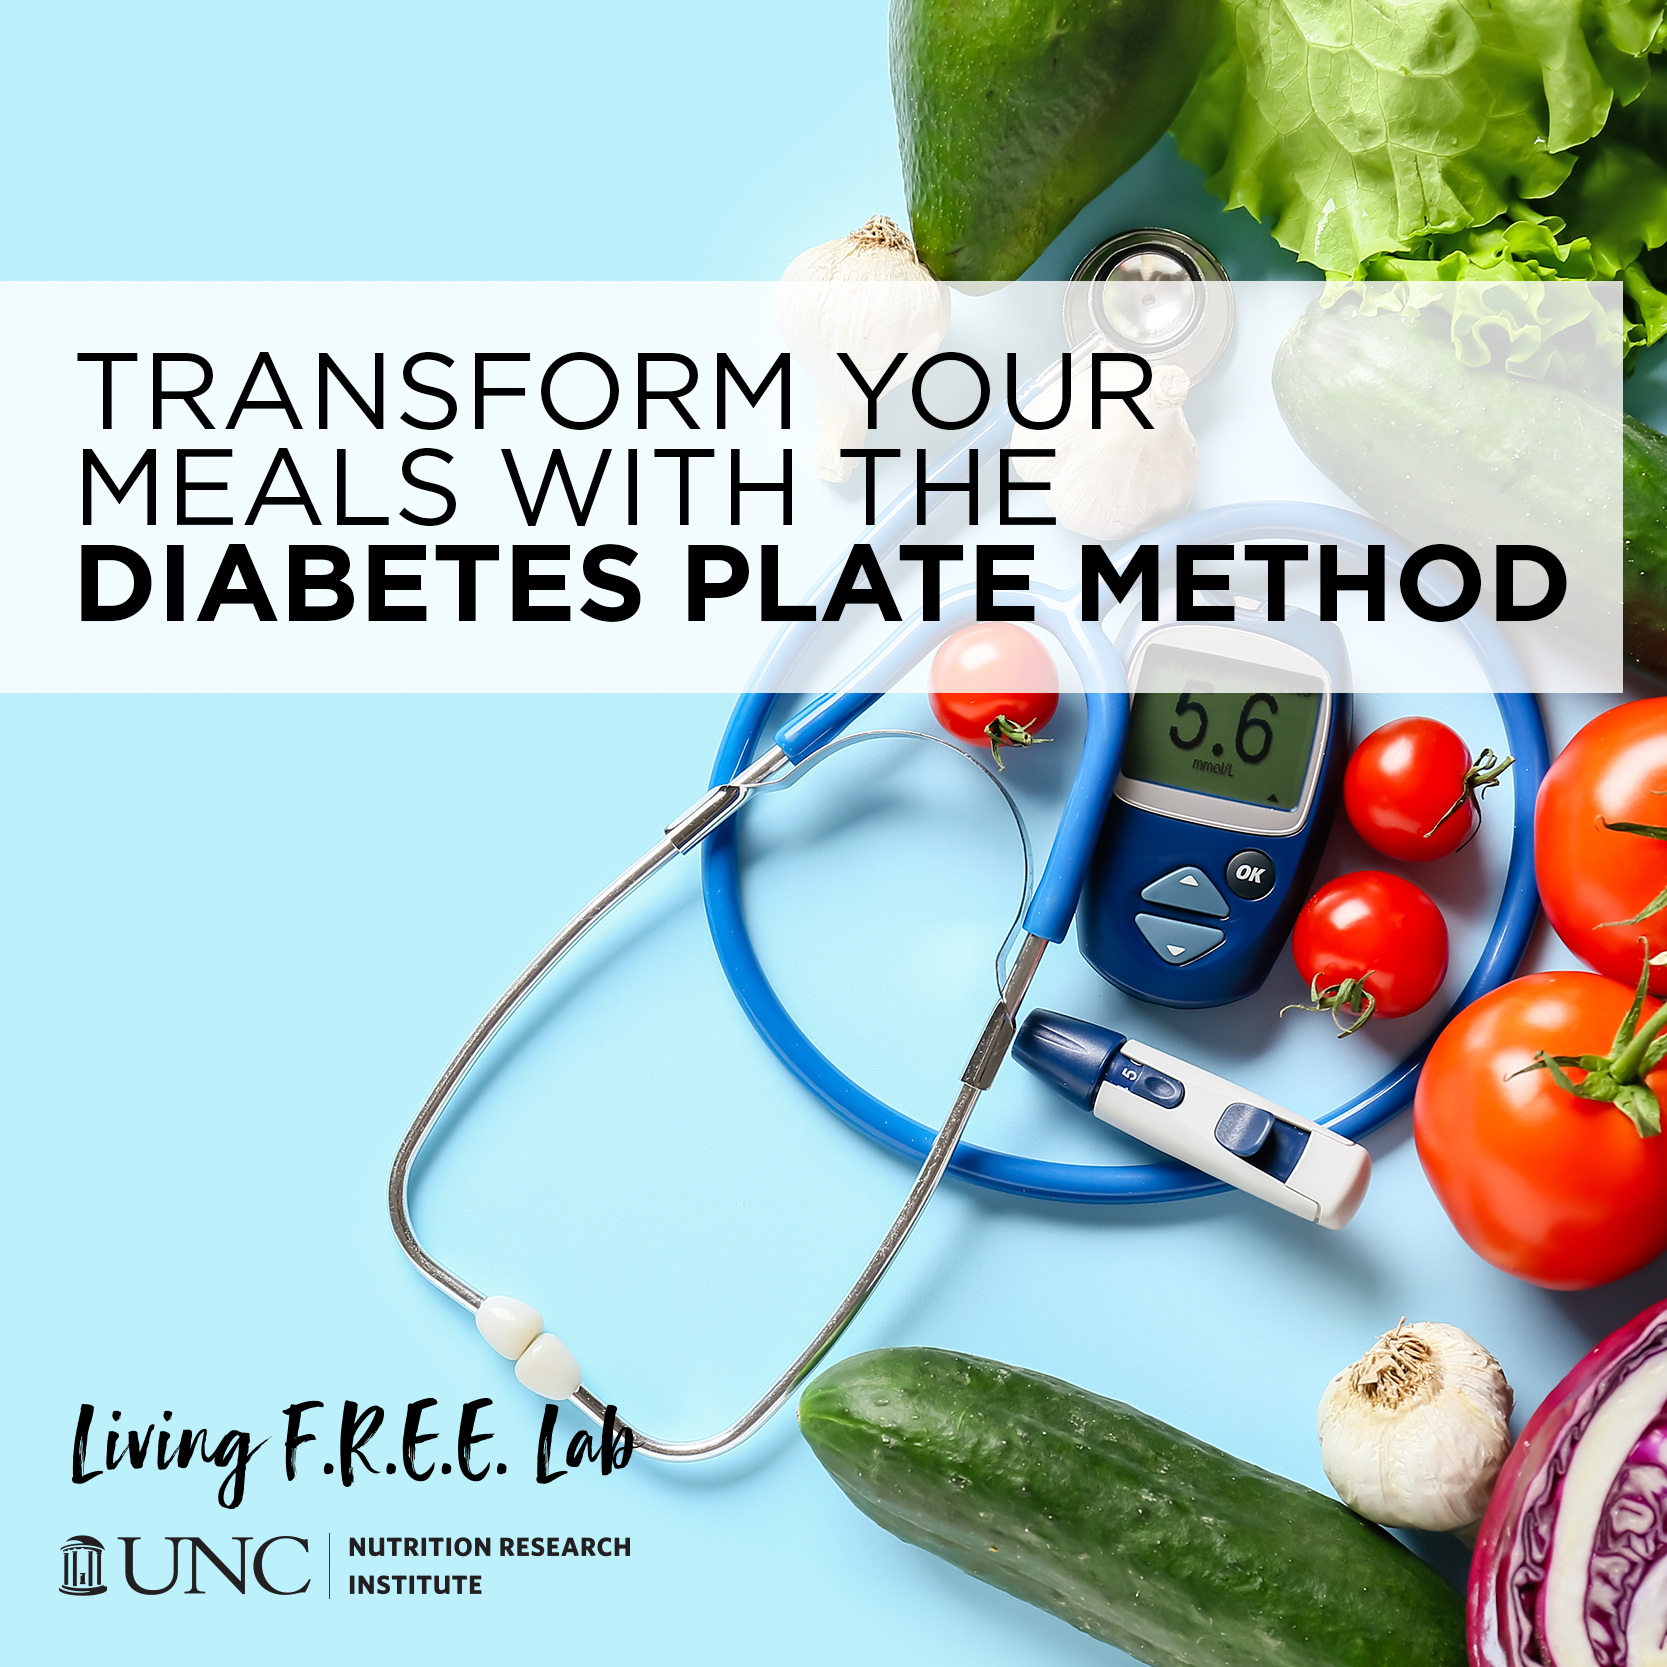 Transform Your Meals with the Diabetes Plate Method